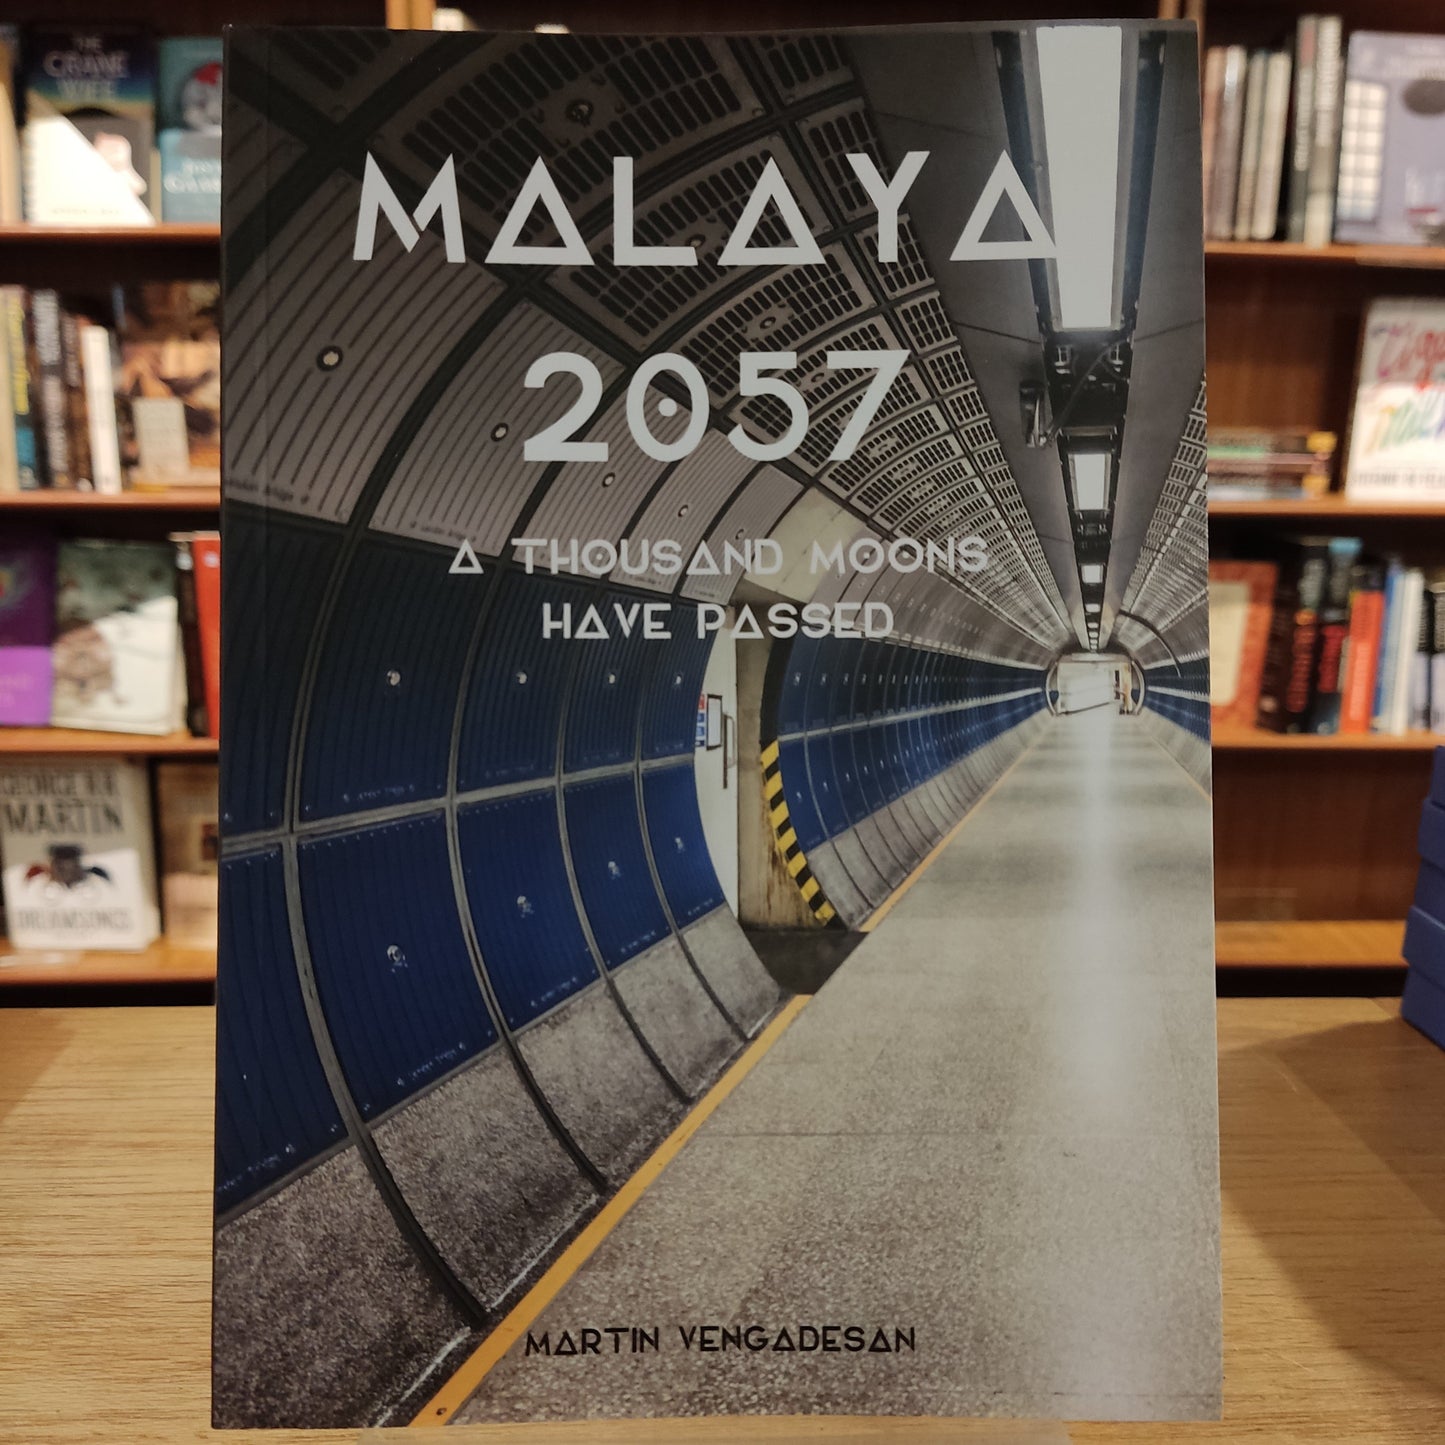 Malaya 2057: a Thousand Moons Have Passed Ebook